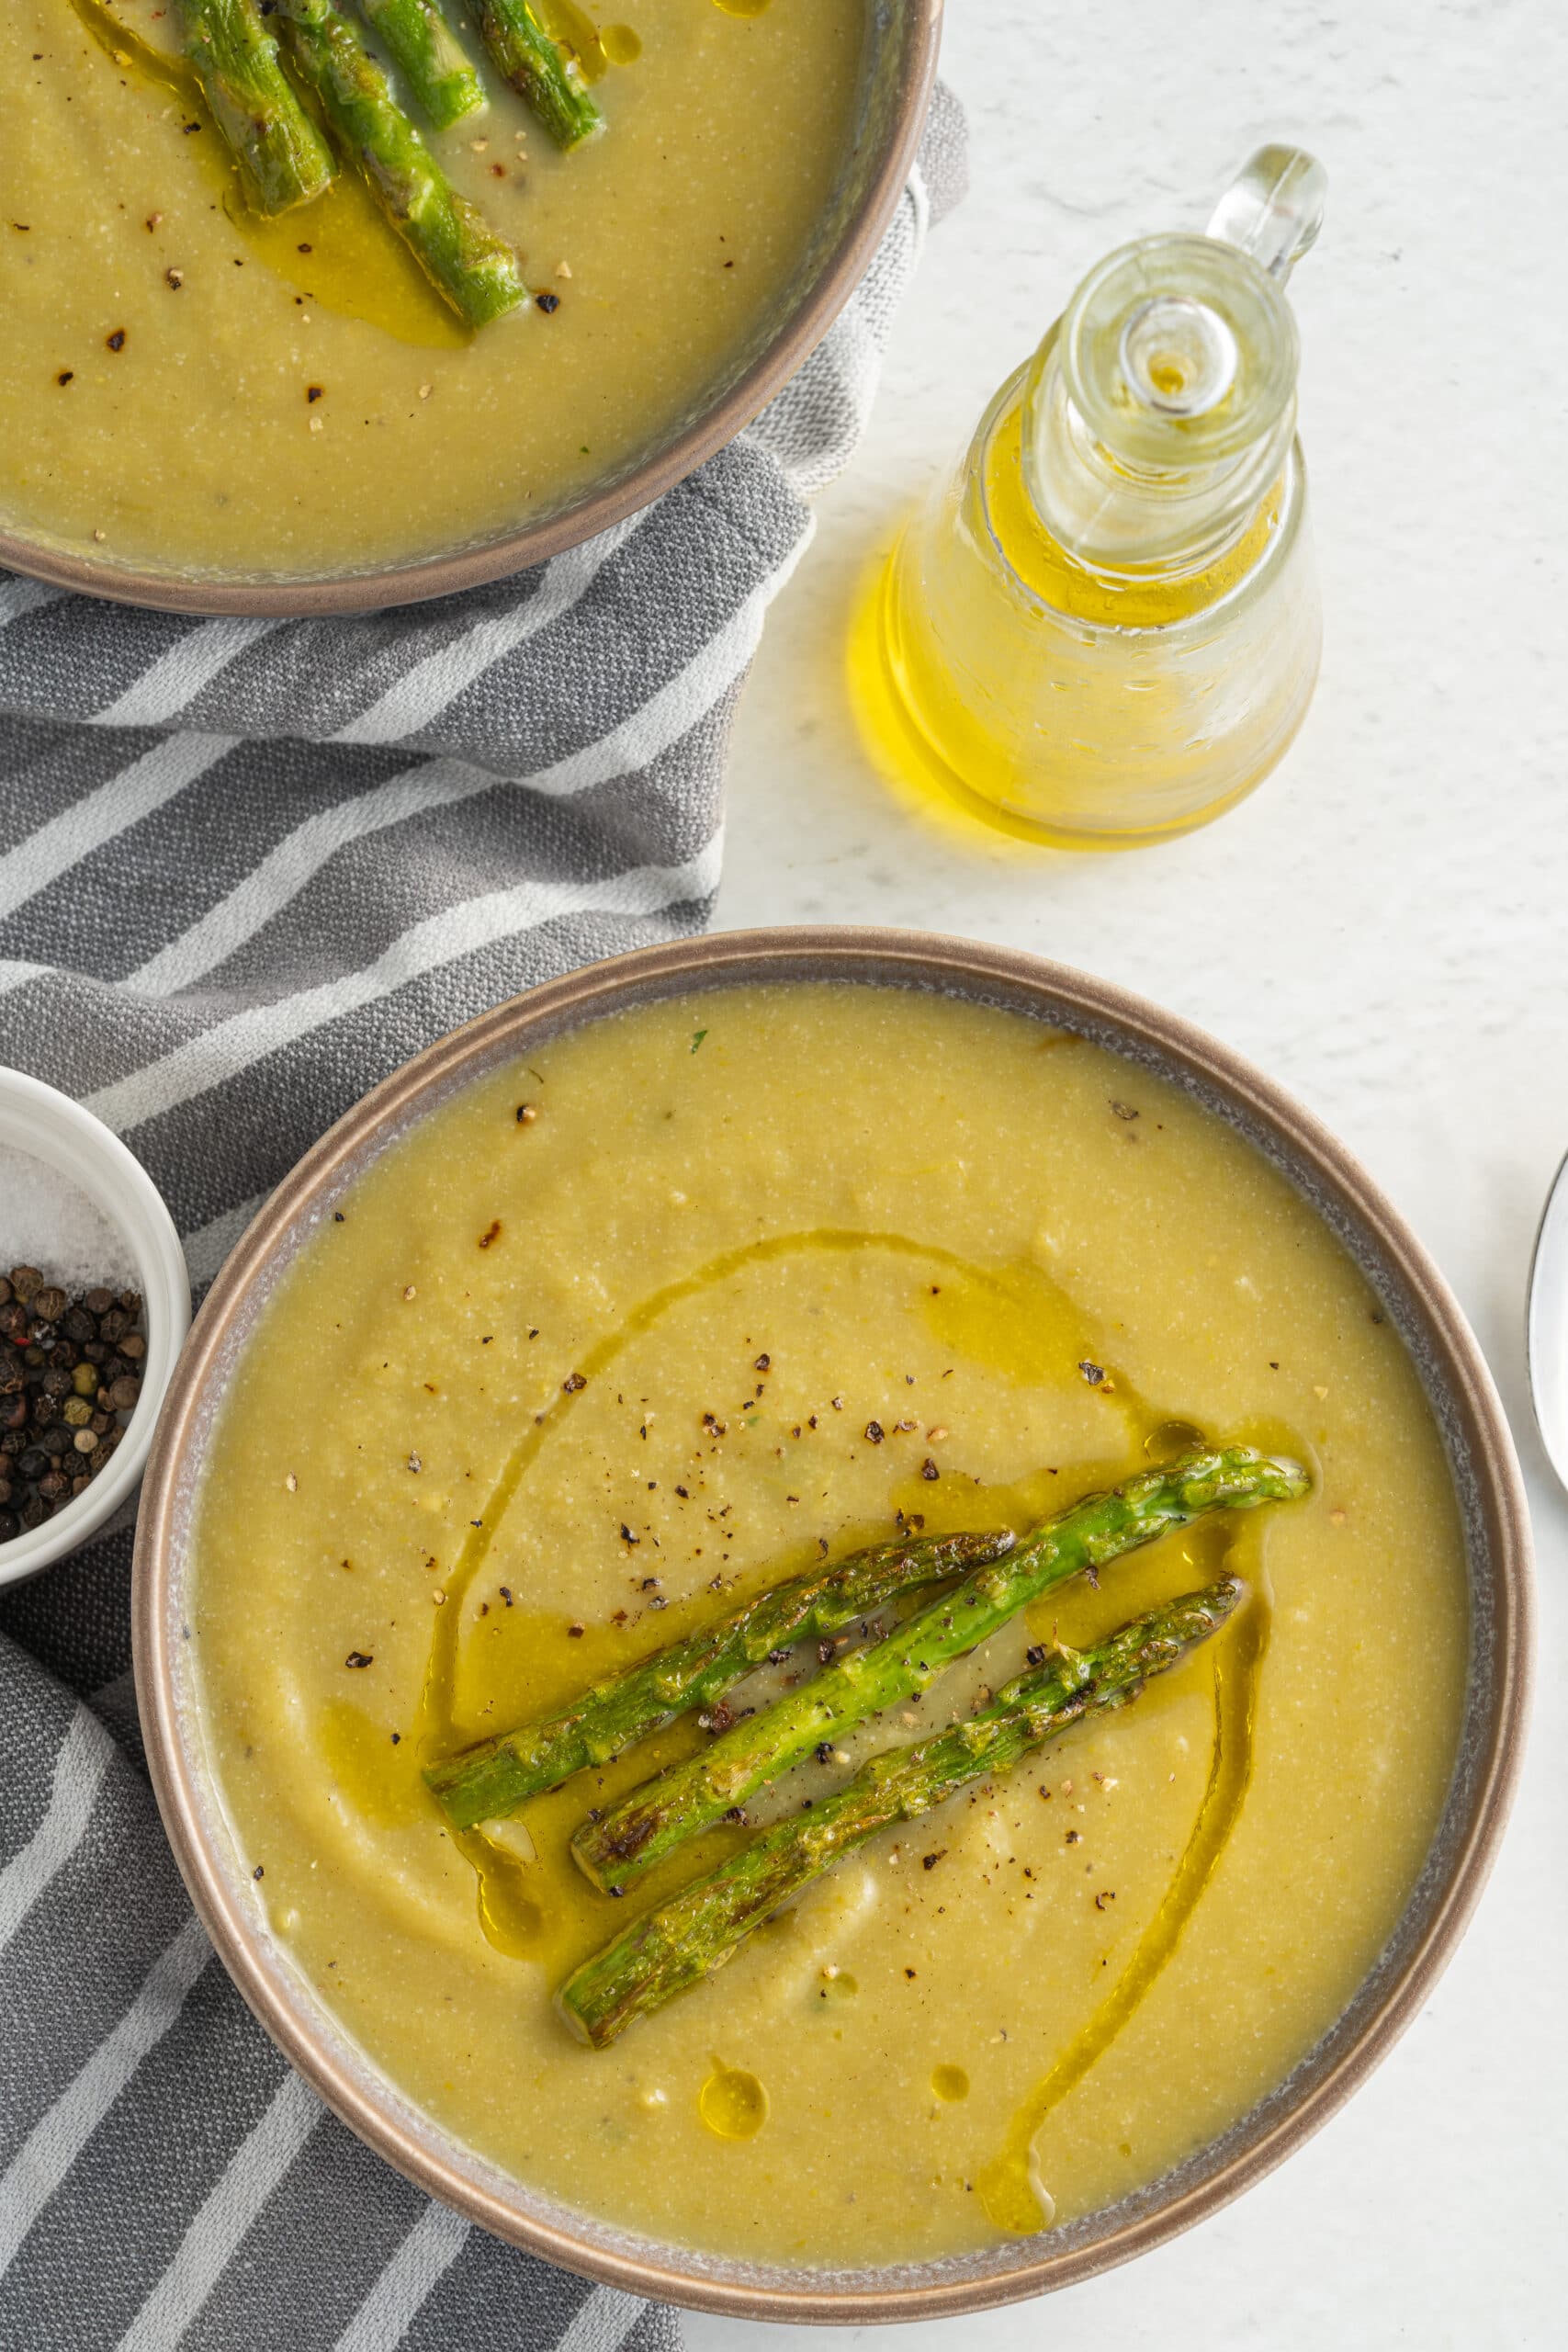 Creamy asparagus soup in a gray bowl with three asparagus spears on top and a bottle of olive oil behind it.